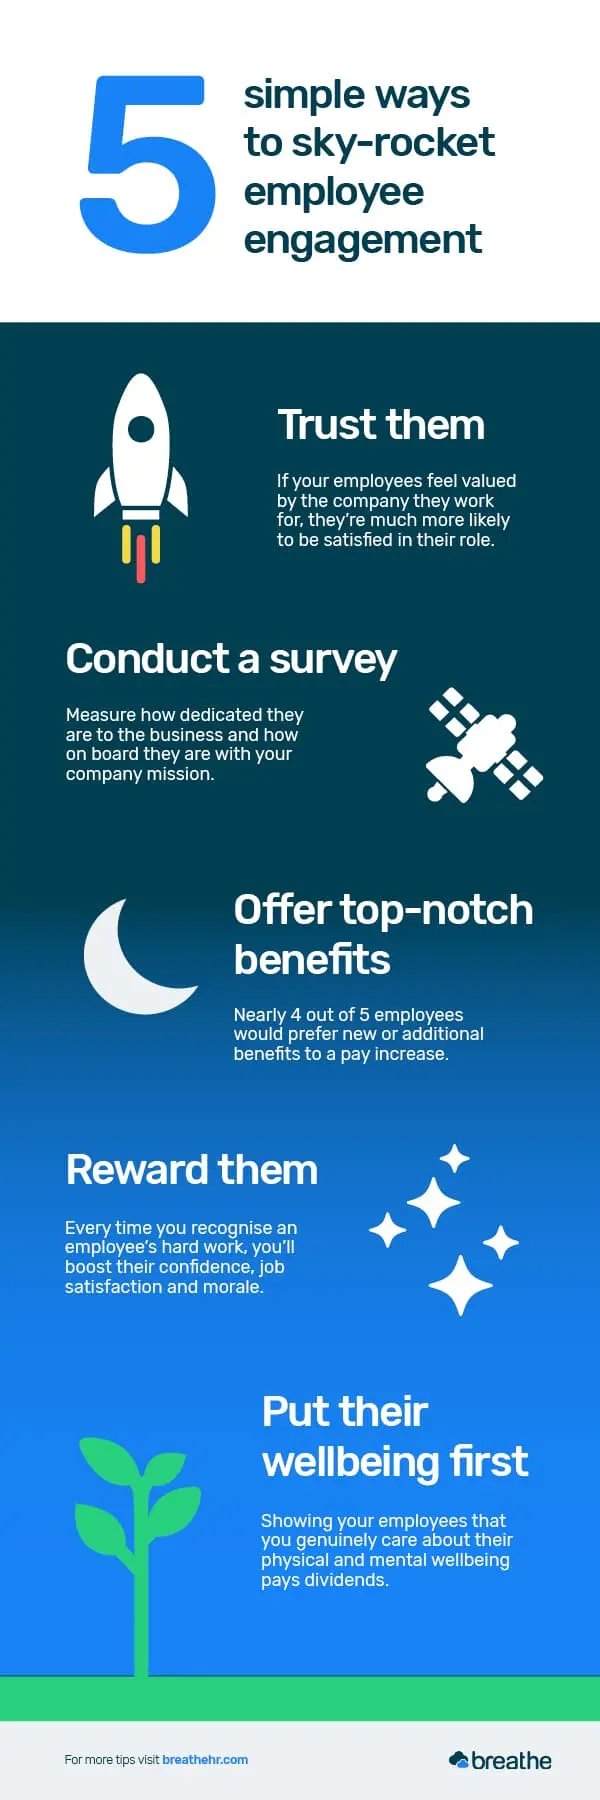 5 simple ways to sky-rocket employee engagement Infographic_600x1800px